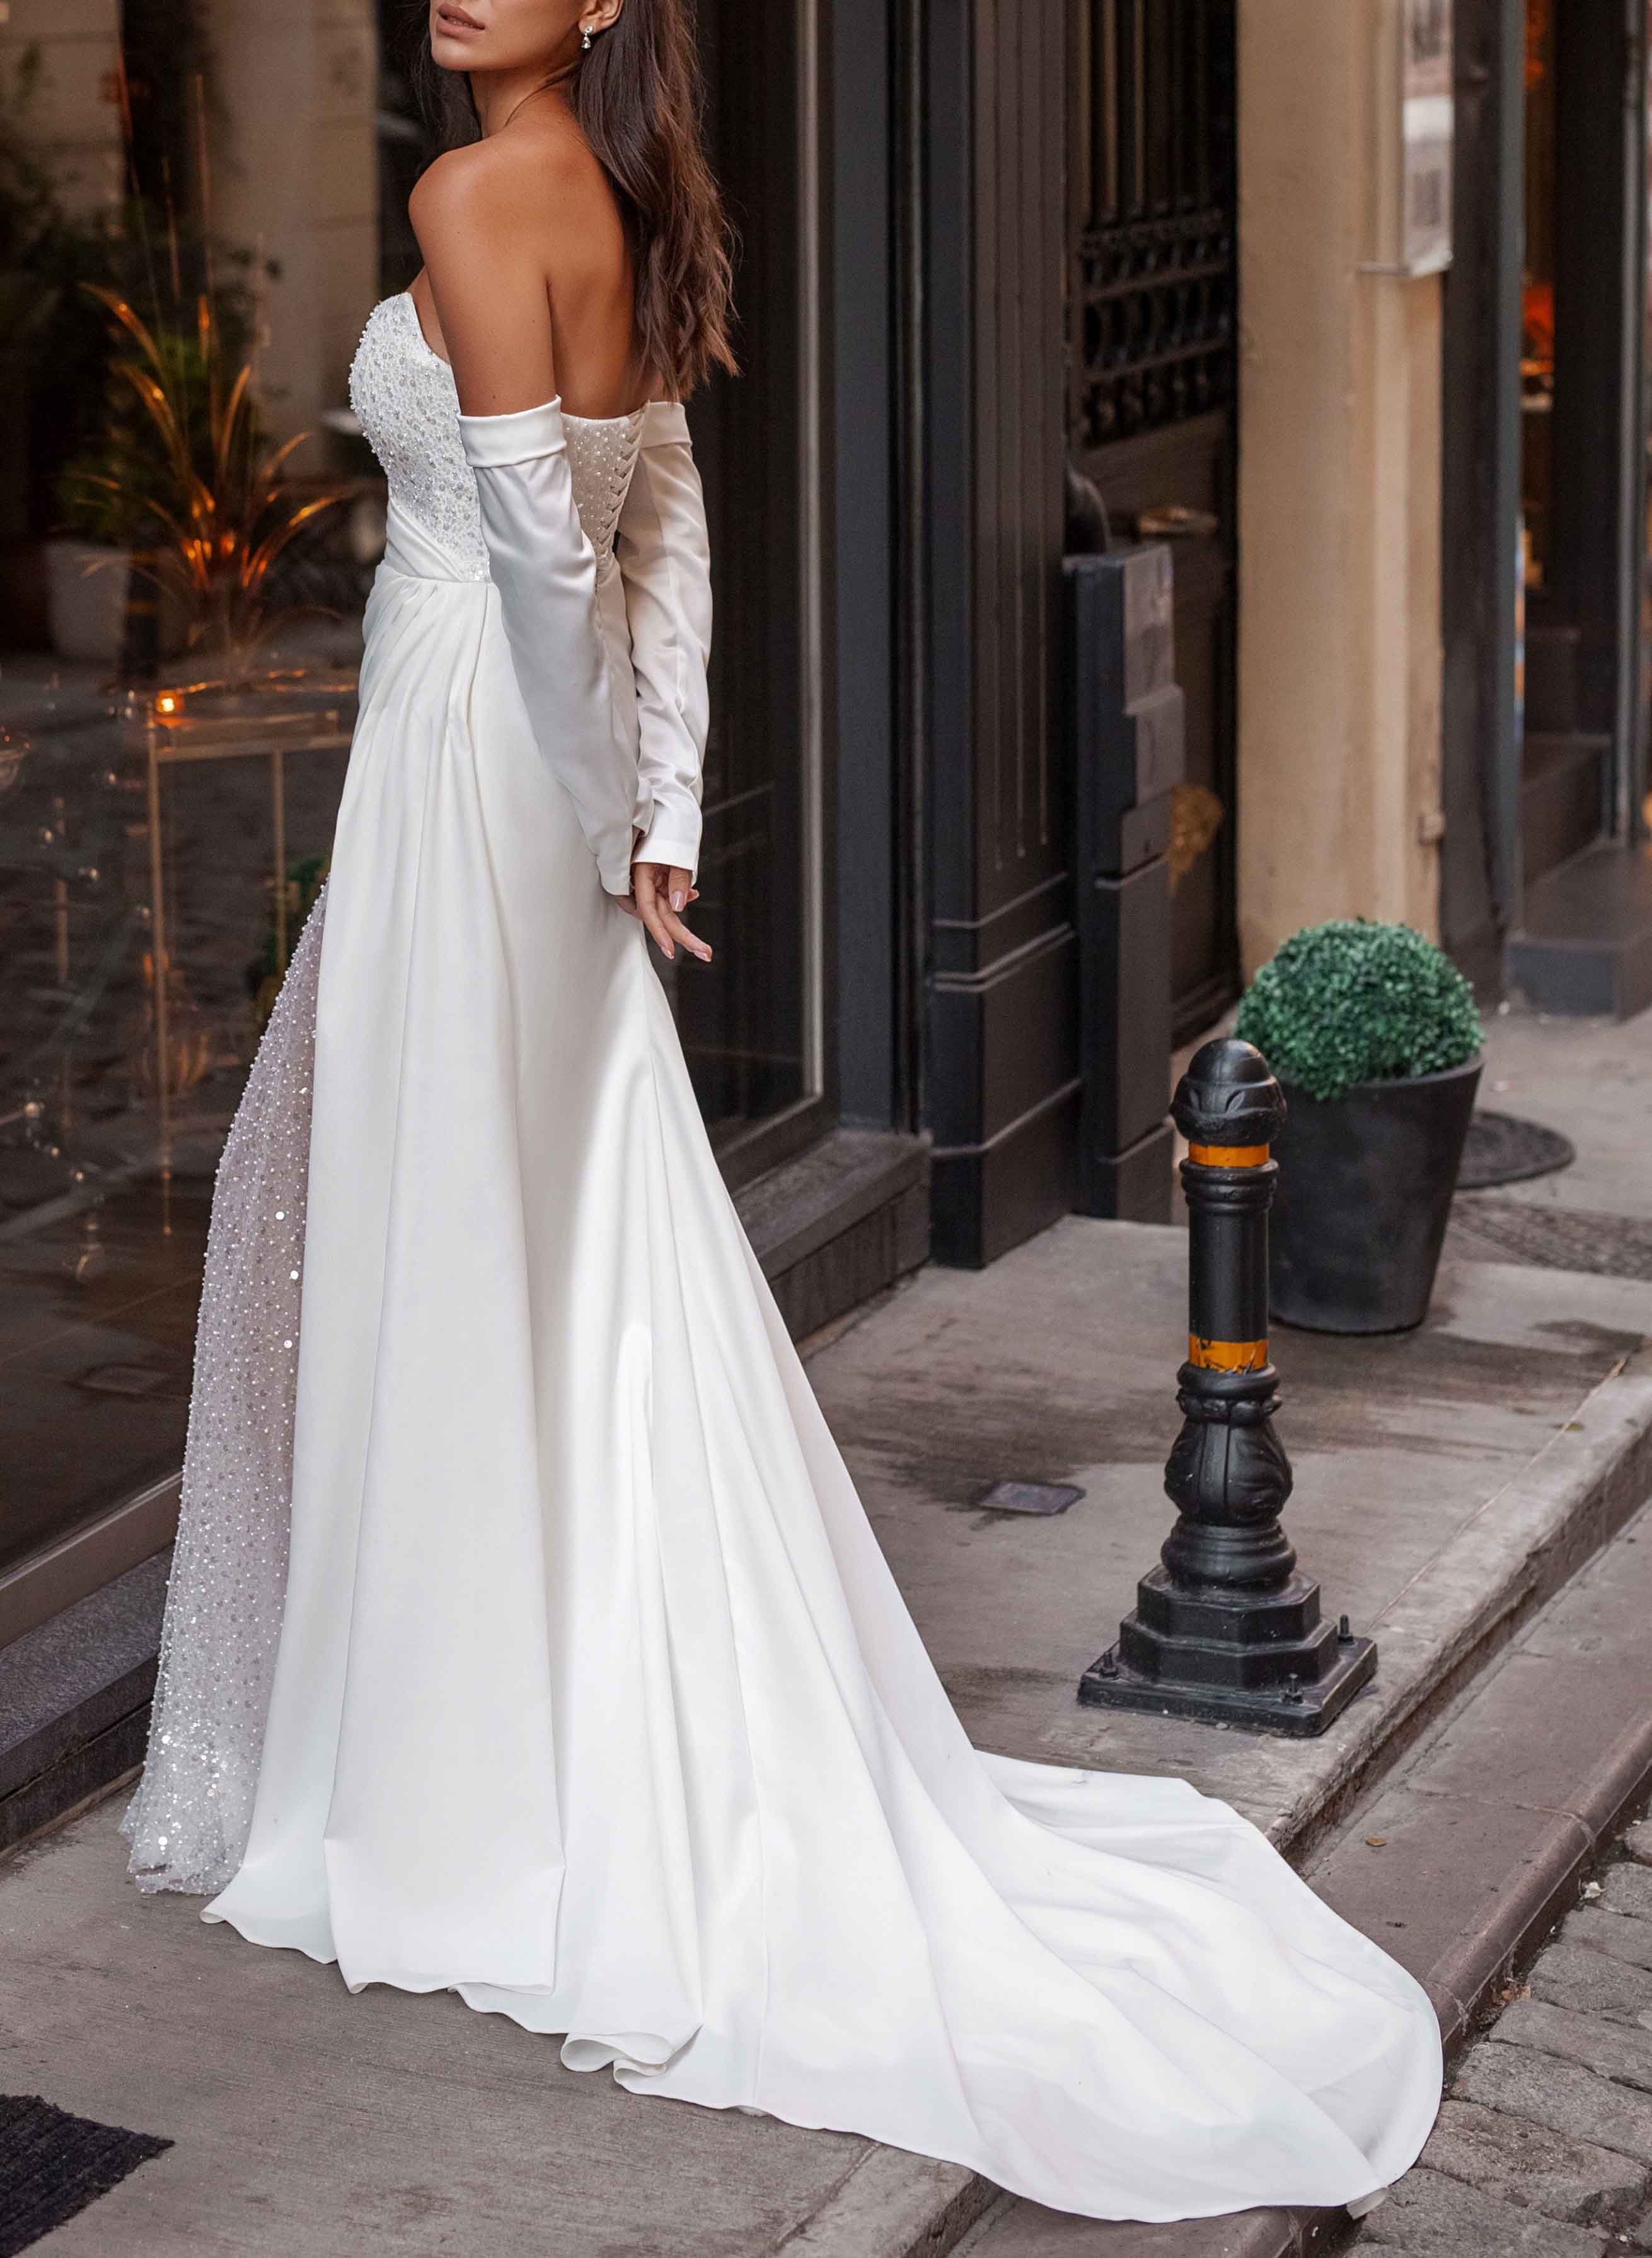 Chic Strapless  Sequined Wedding Dresses With Detachable Sleeves